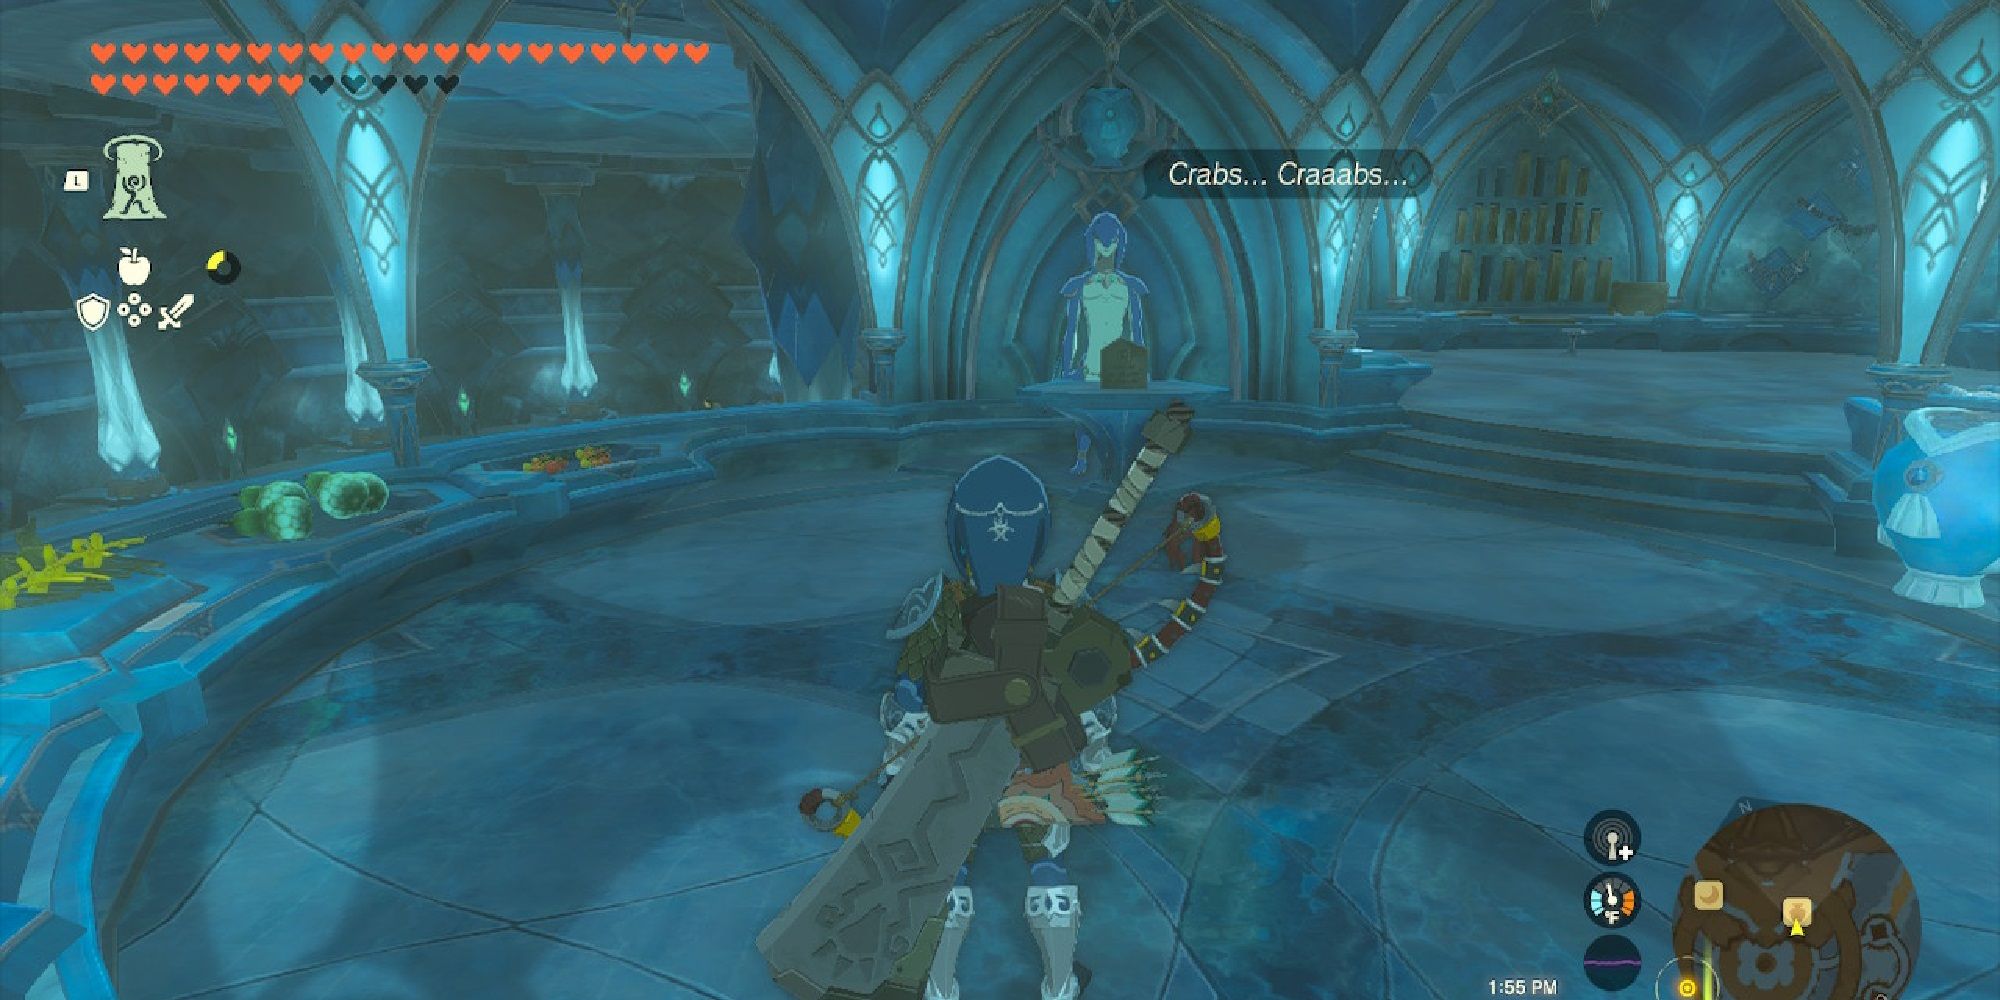 The Zora general store manager mutters to himself about crabs while Link watches